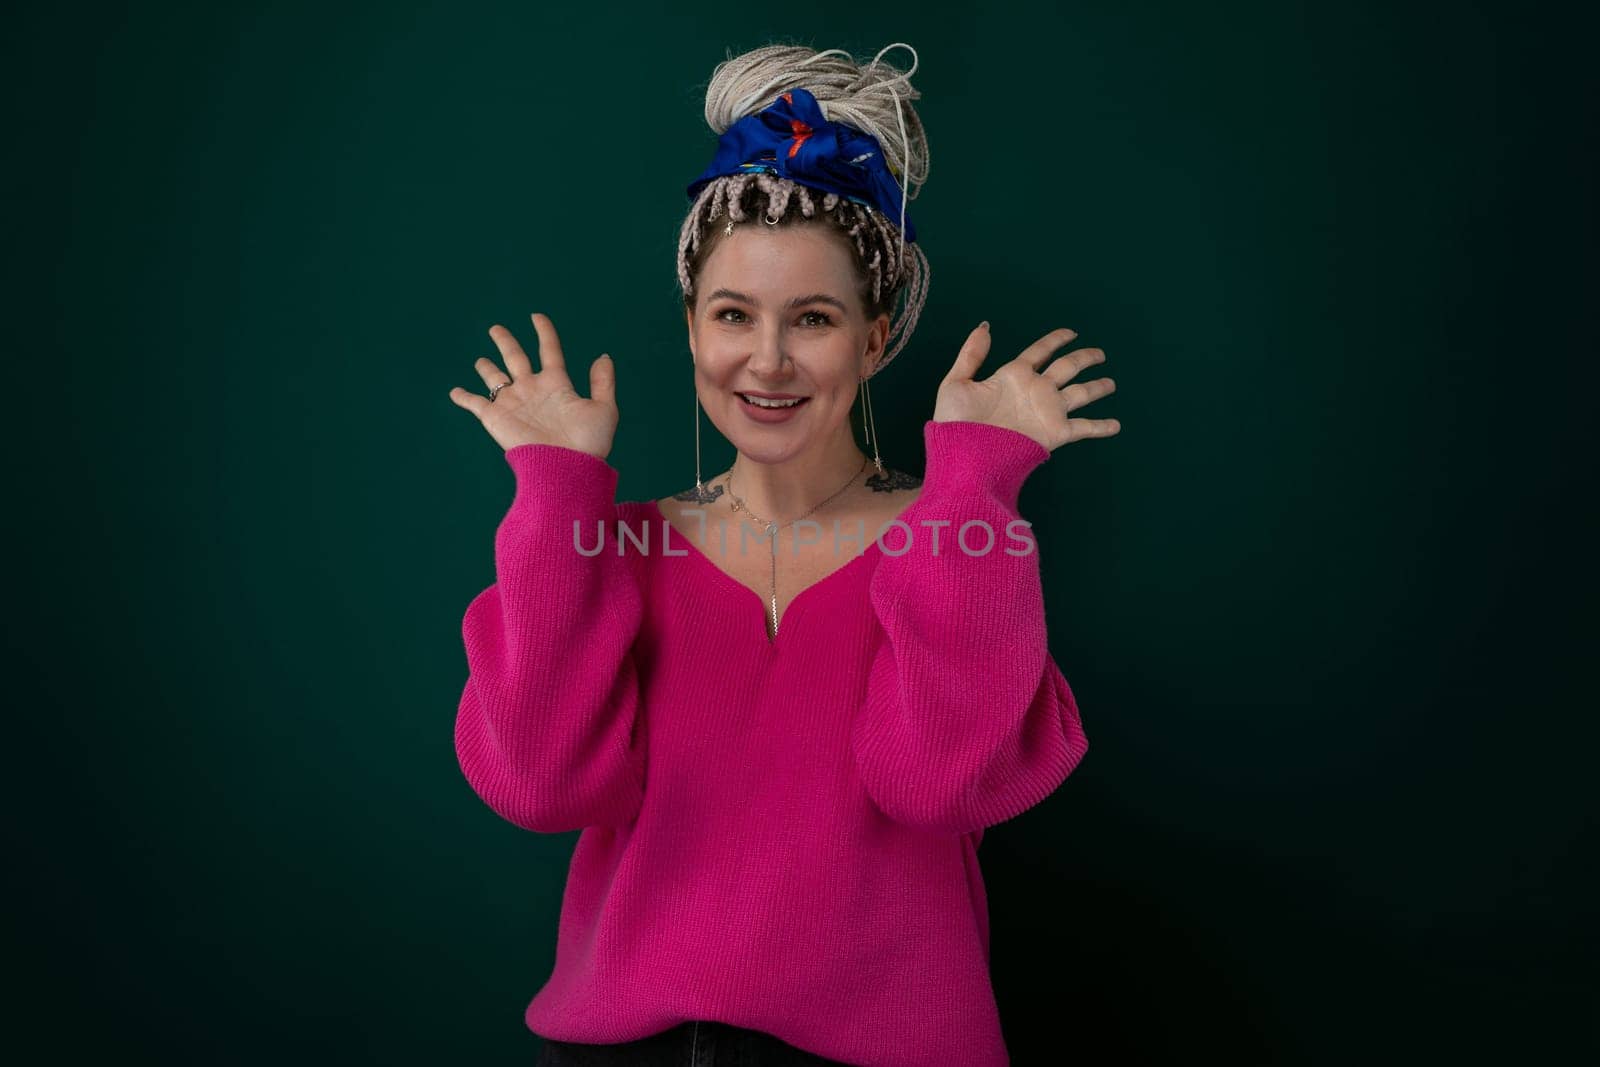 Woman Wearing Pink Sweater and Blue Bow in Hair by TRMK